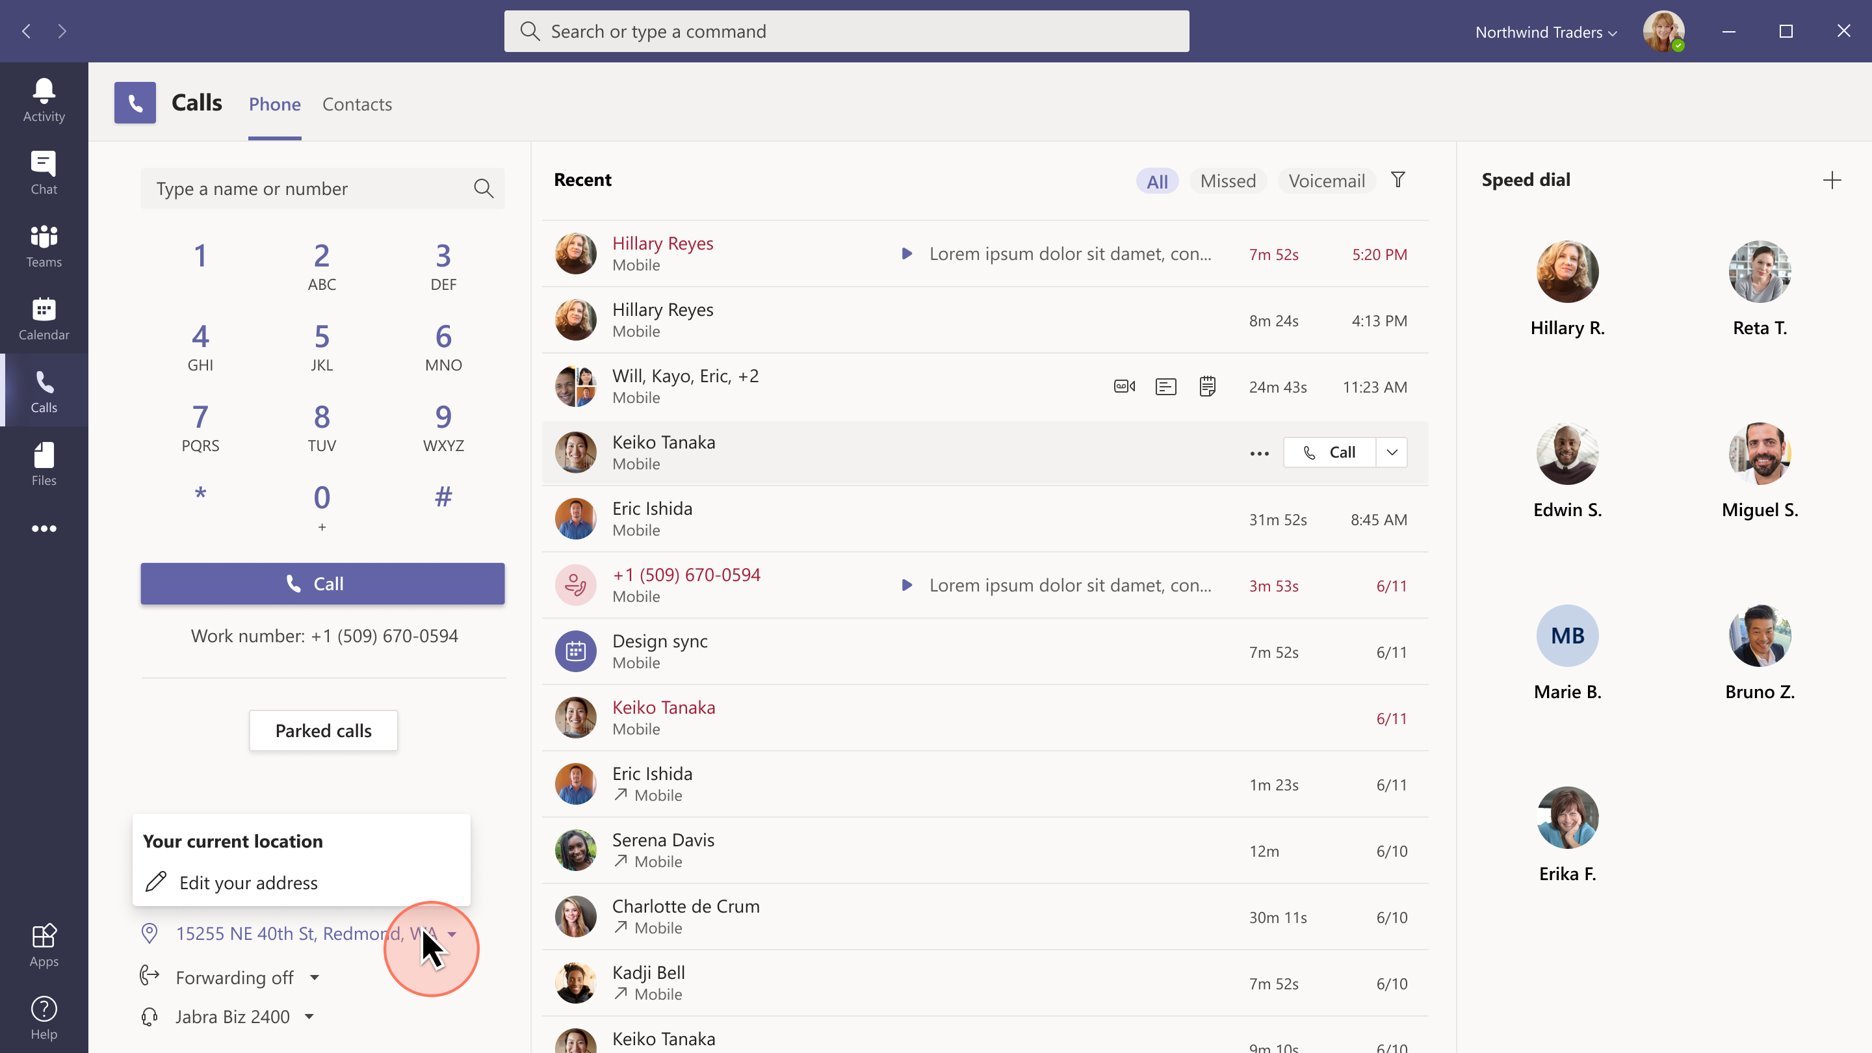 Microsoft Teams will soon support Dynamic e911 for Work from Home users